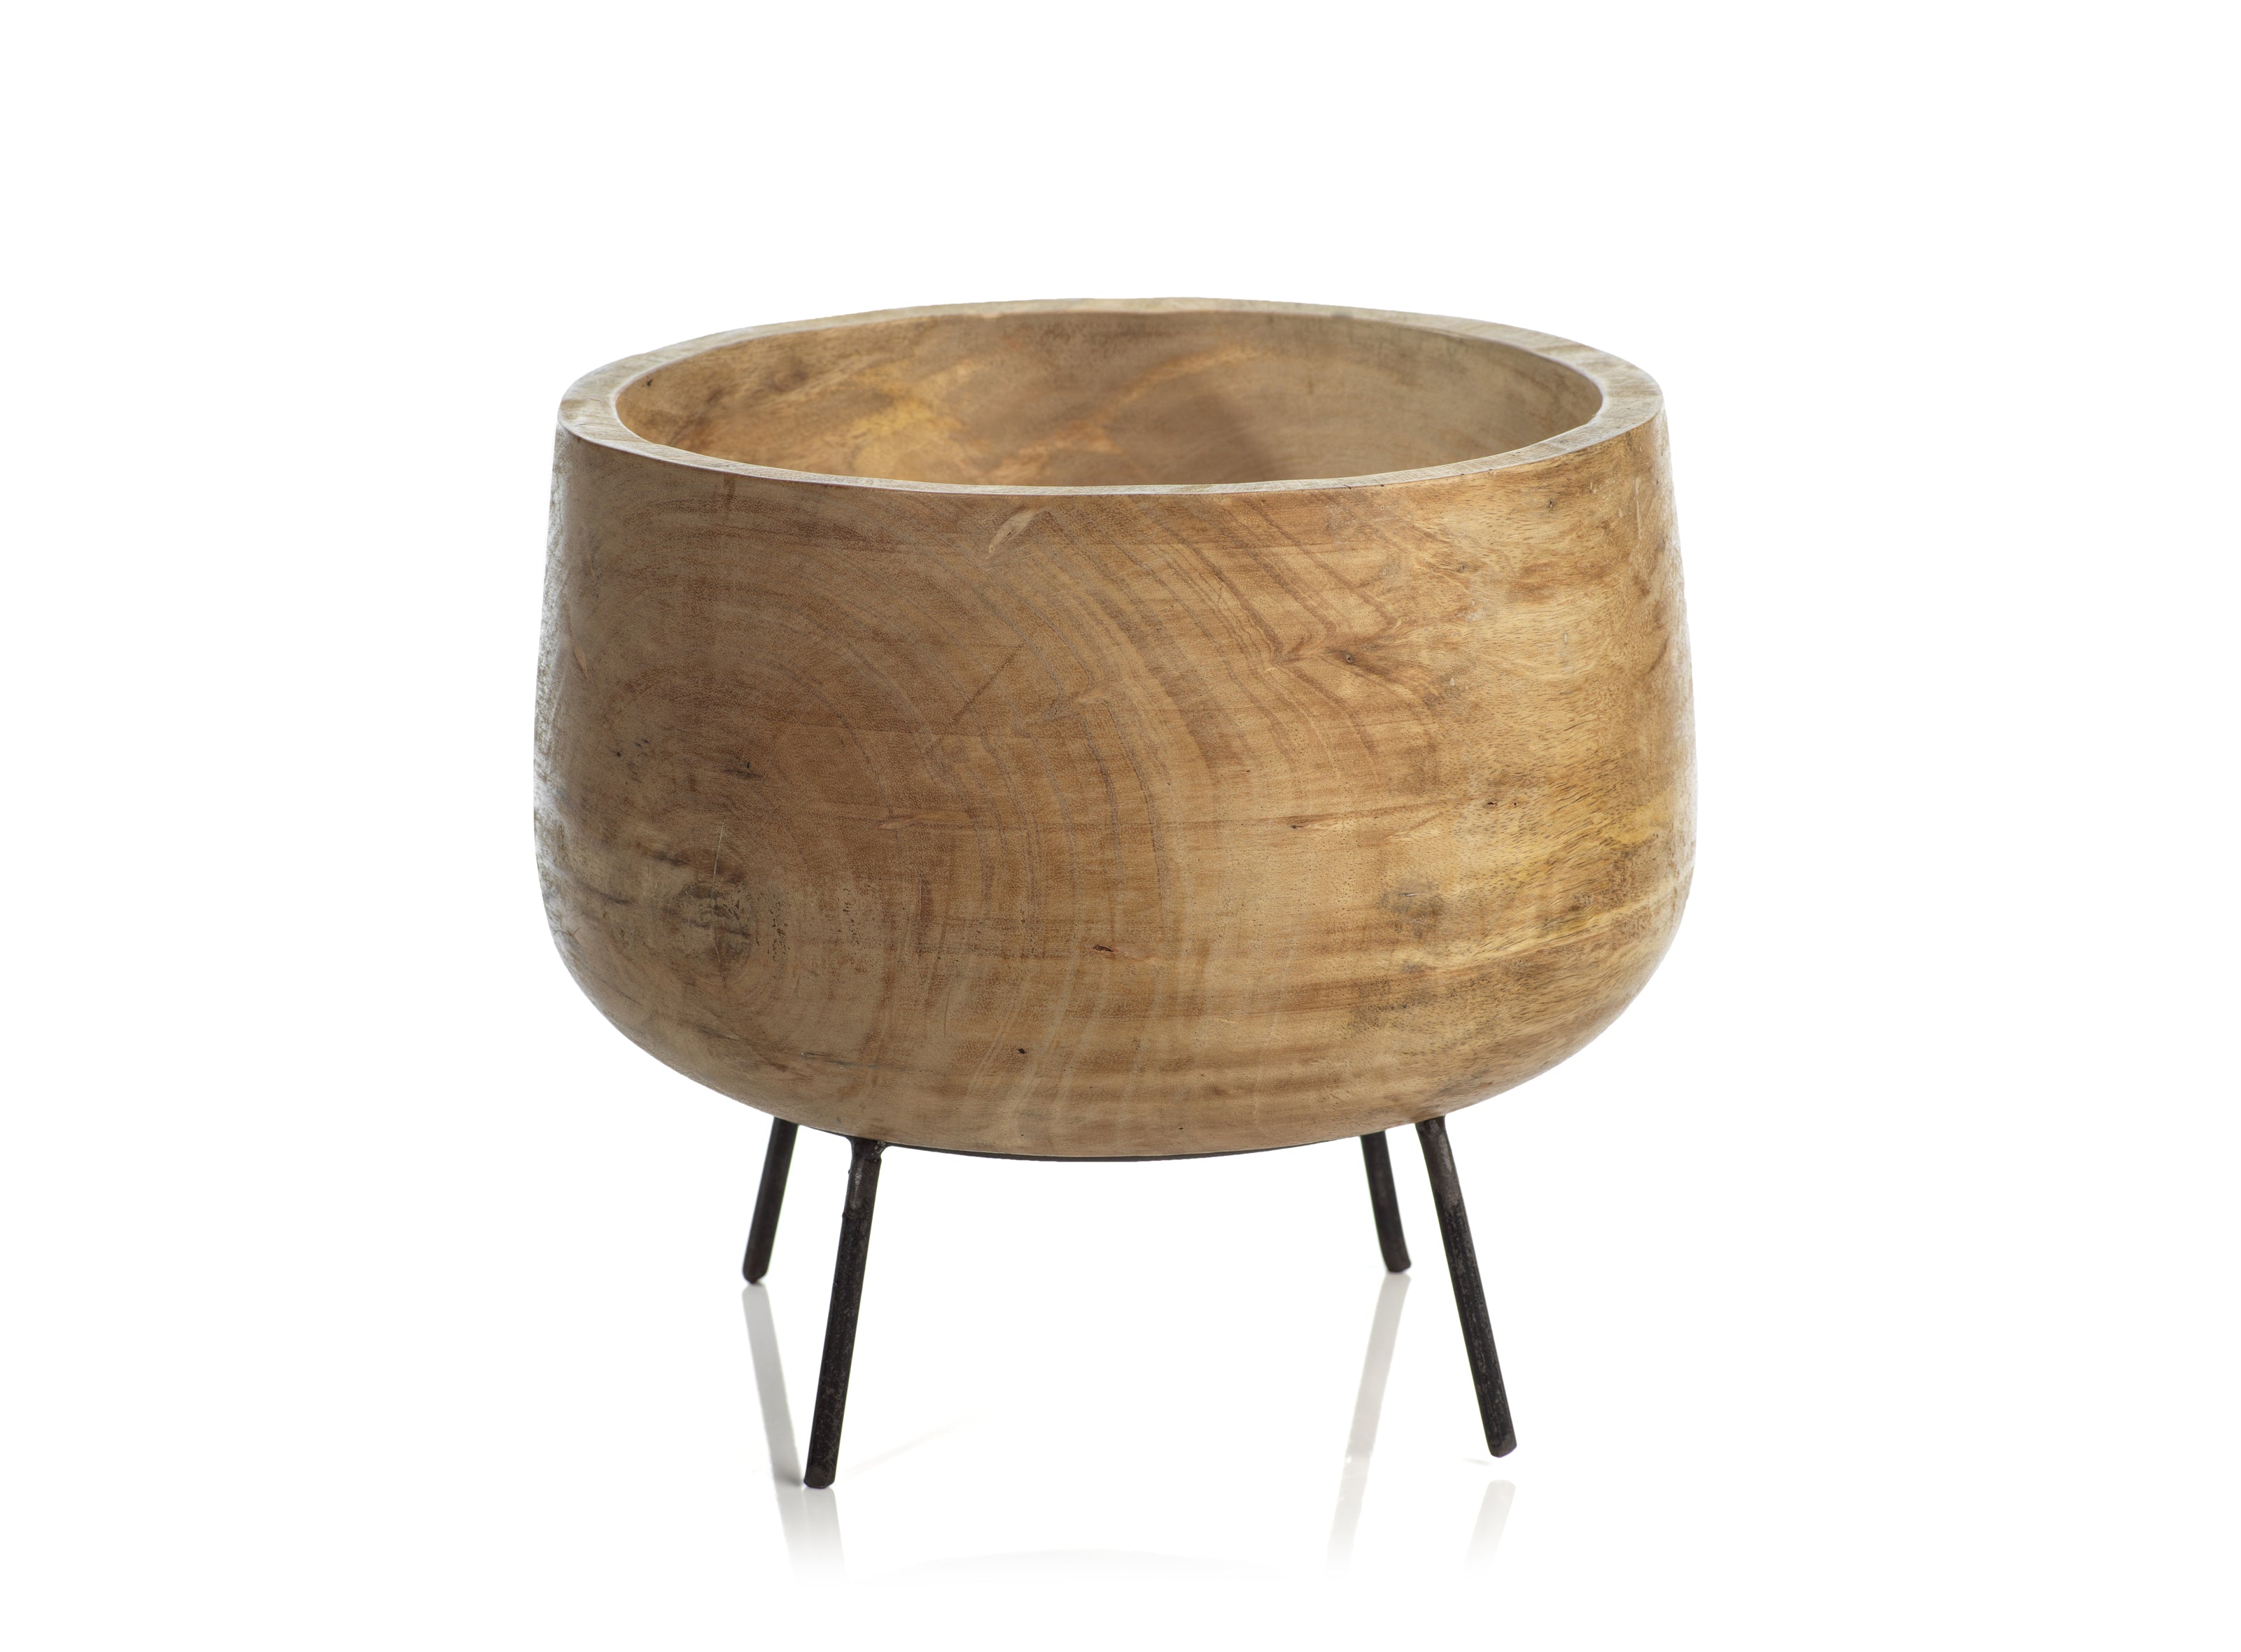 Mango Wood Bowl on Metal Stand - CARLYLE AVENUE